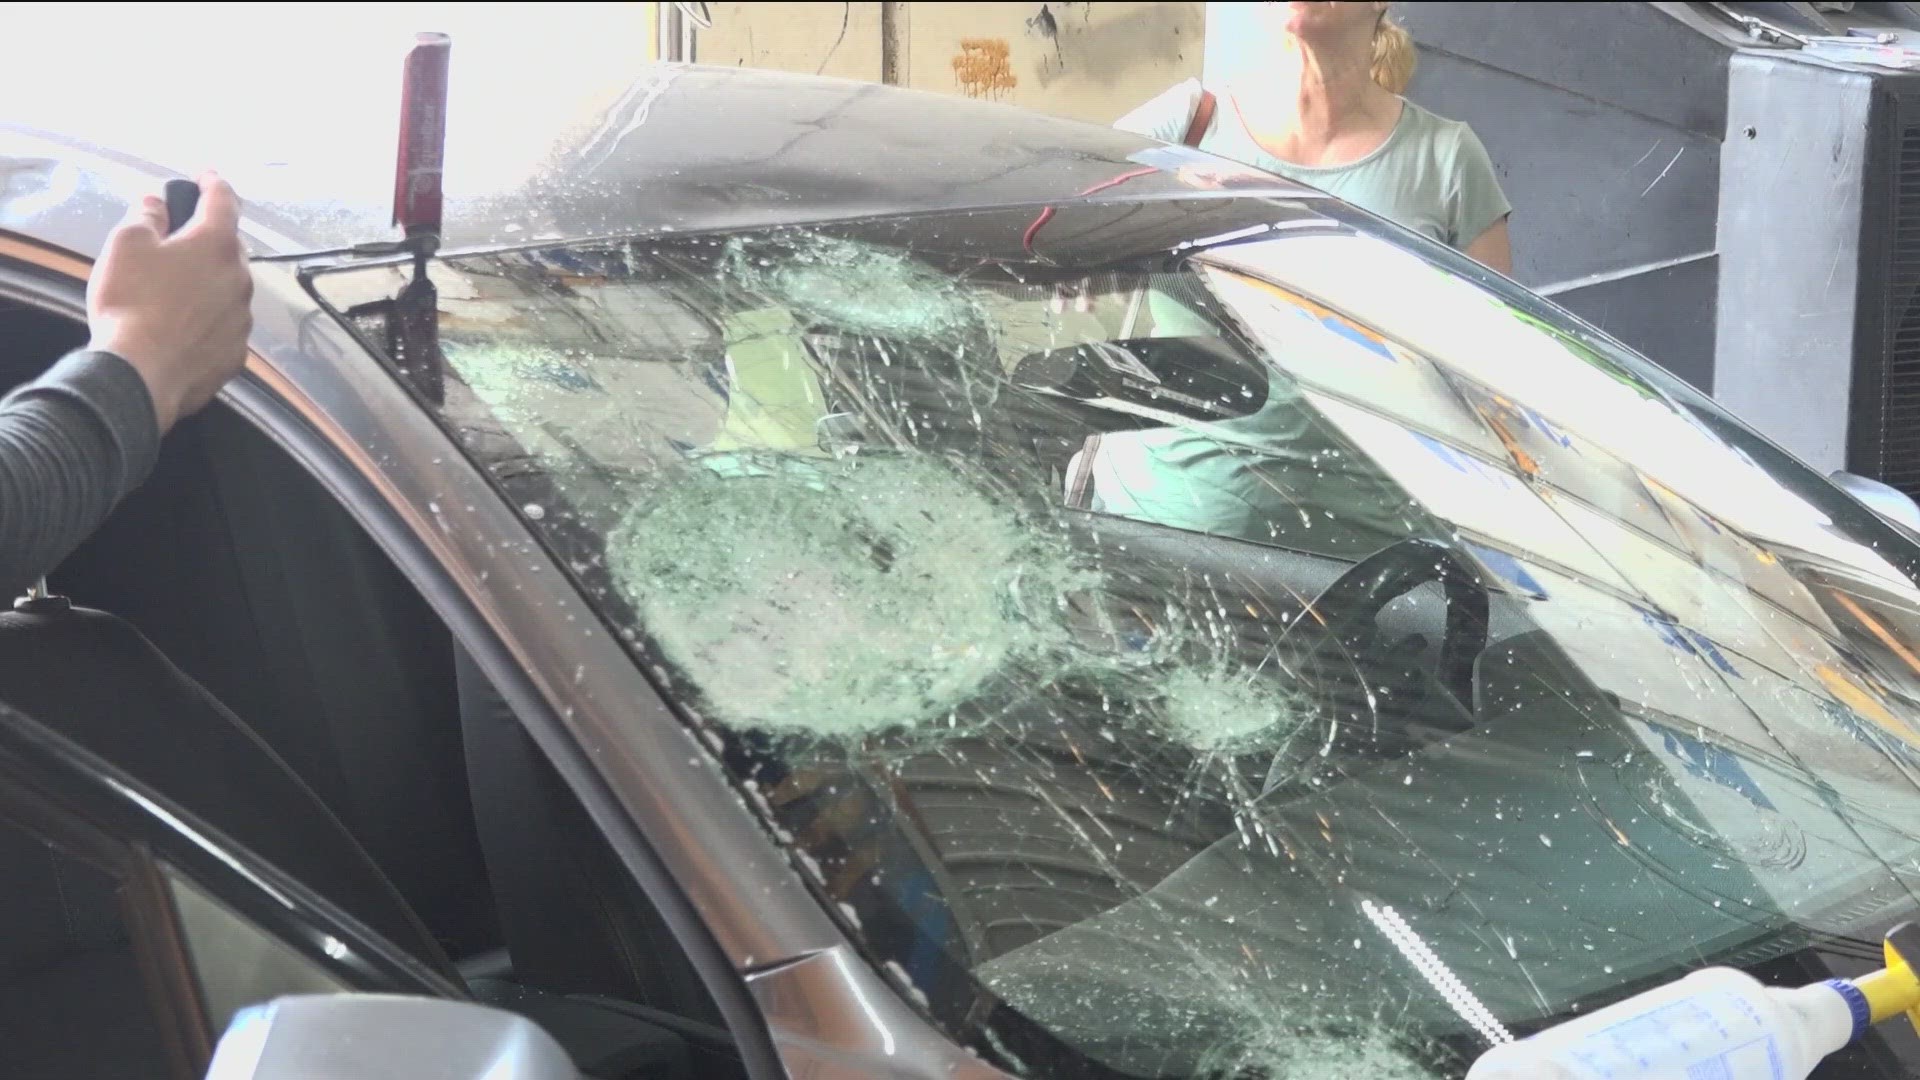 People whose cars were hit by hail are looking for repair shops and contractors to fix the damage. Drivers are looking for businesses they can trust.